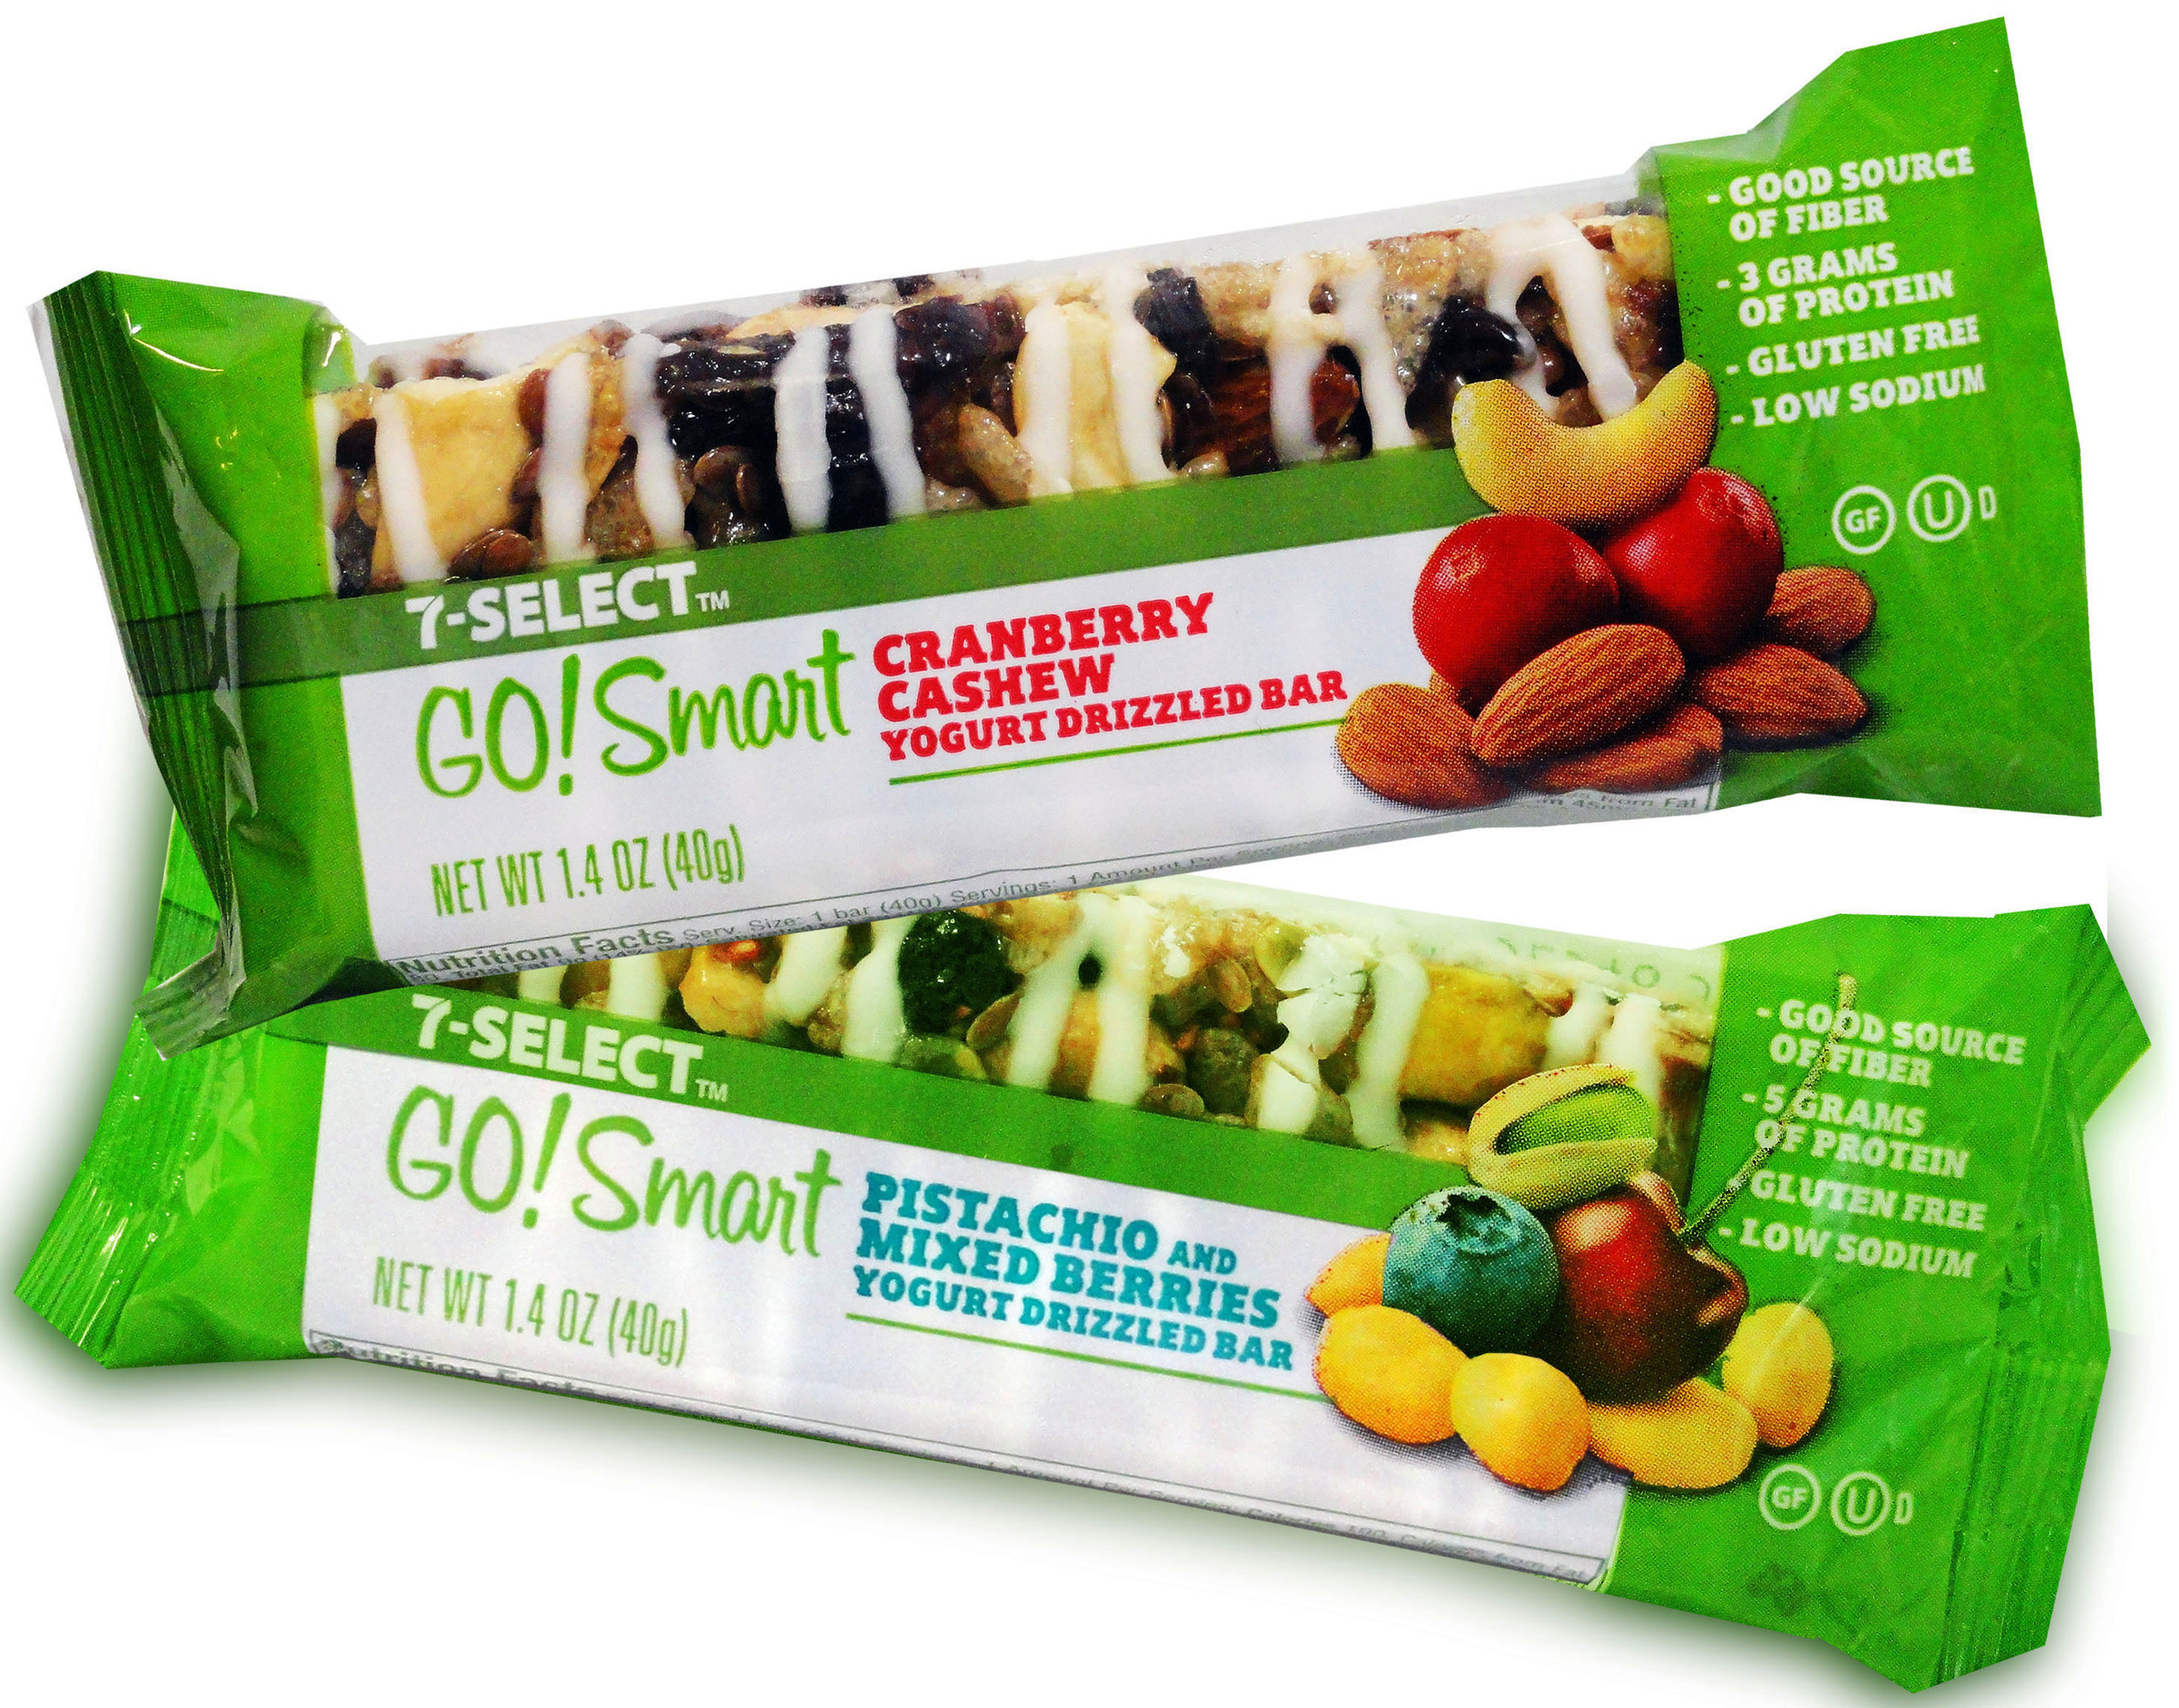 Better for you and your New Year's health resolution, 7-Eleven just introduced two proprietary health bars as part of its 7-Select private-brand line. Weighing in at just under 200 calories, the 7-Select Go!Smart fruit and nut bars come in two varieties - Cranberry Cashew, and Pistachio and Mixed Berries.